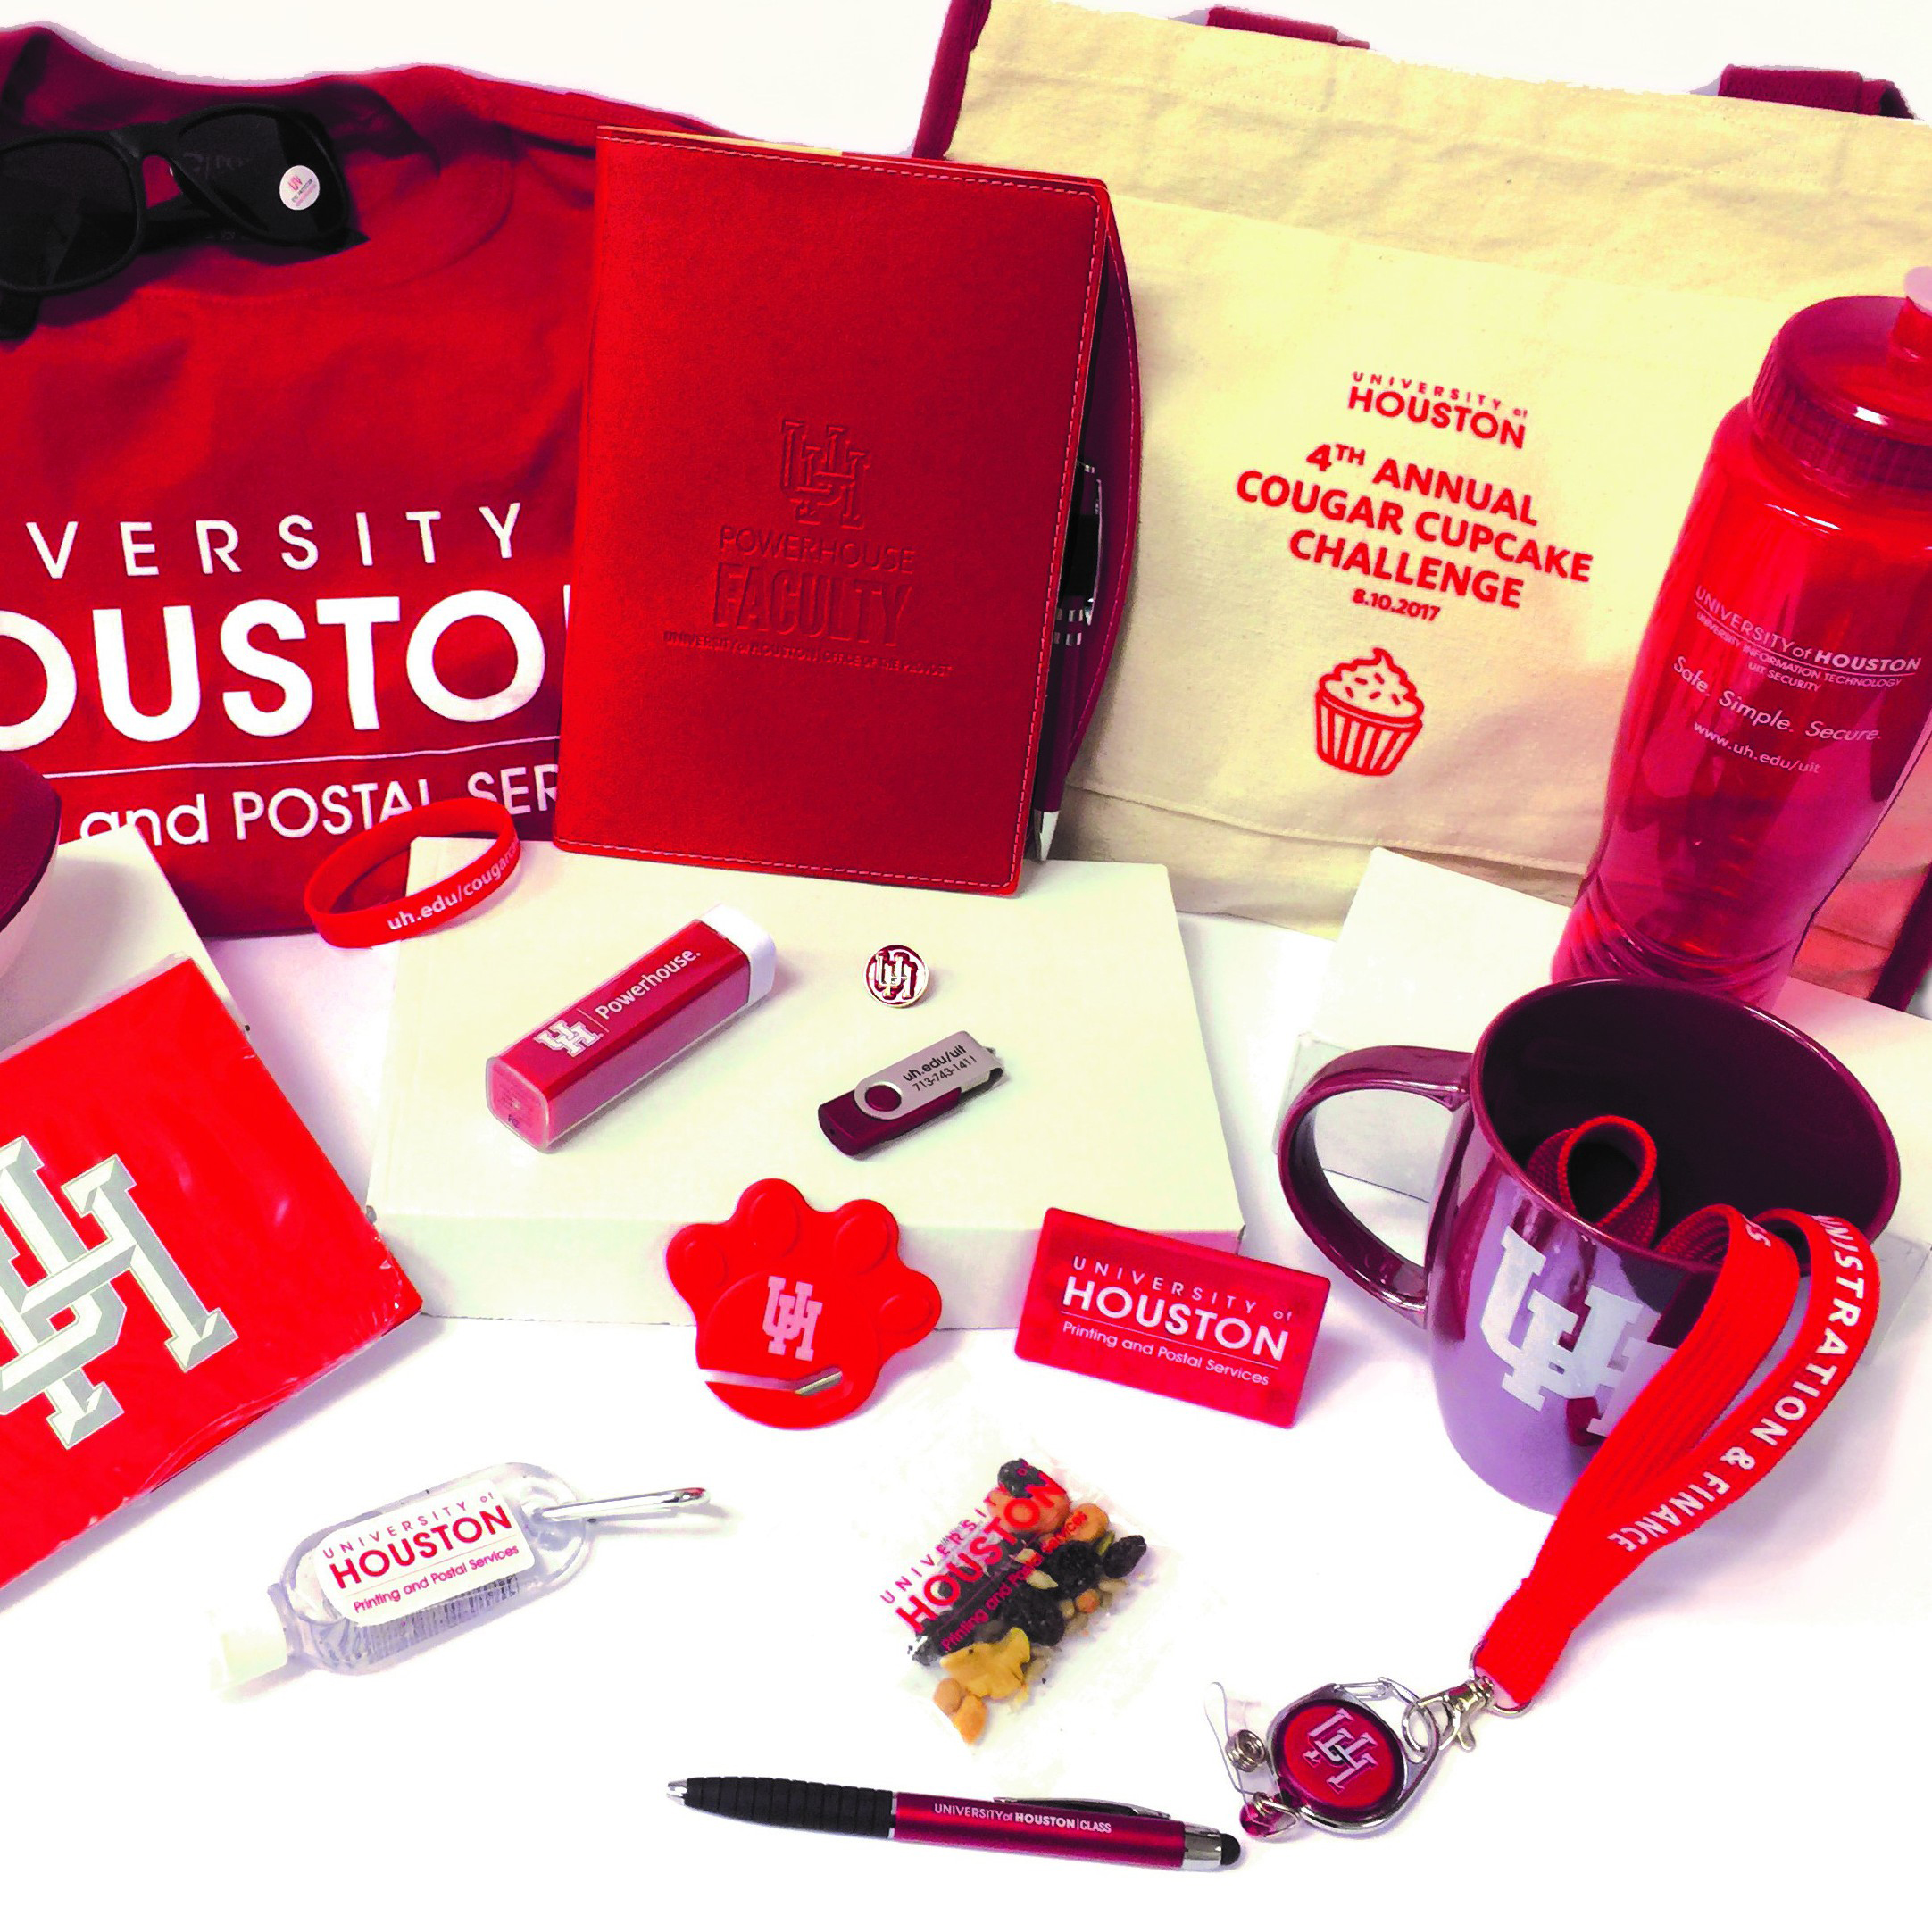 UH Printing Services is now a full-service advertising specialty company that offers promotional products.